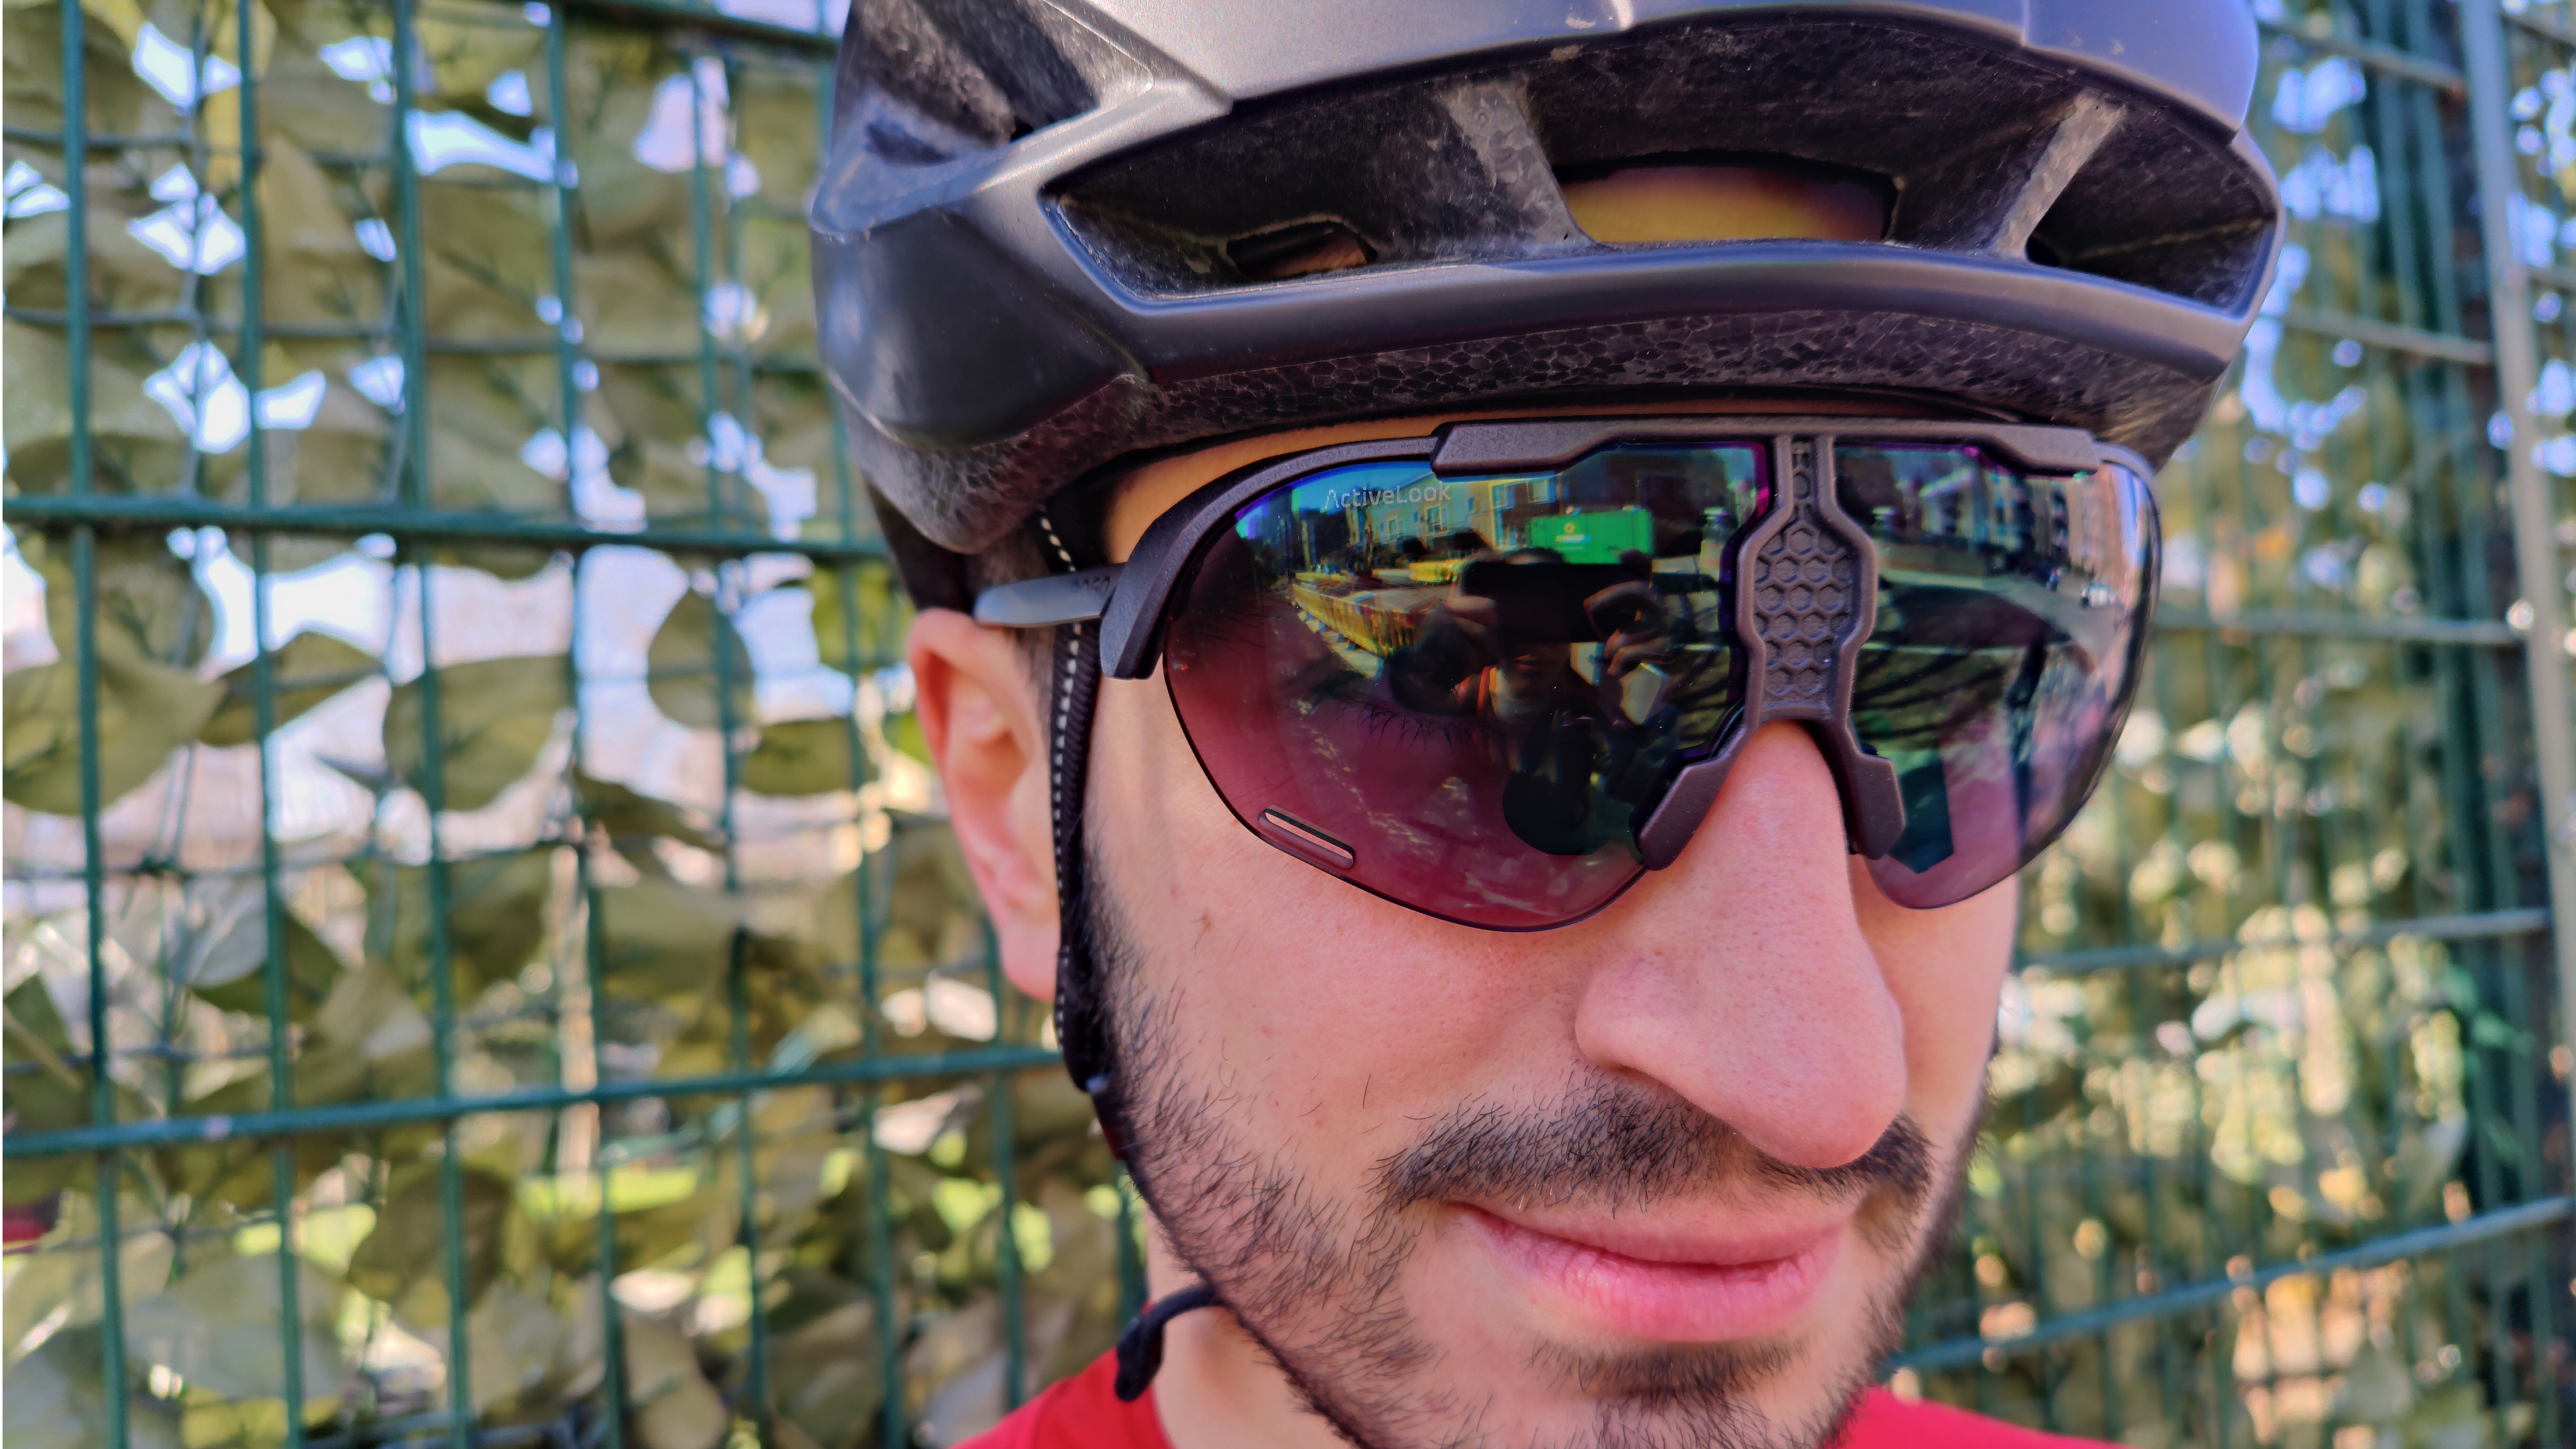 Here's what a pair of AR sports glasses taught me about the future